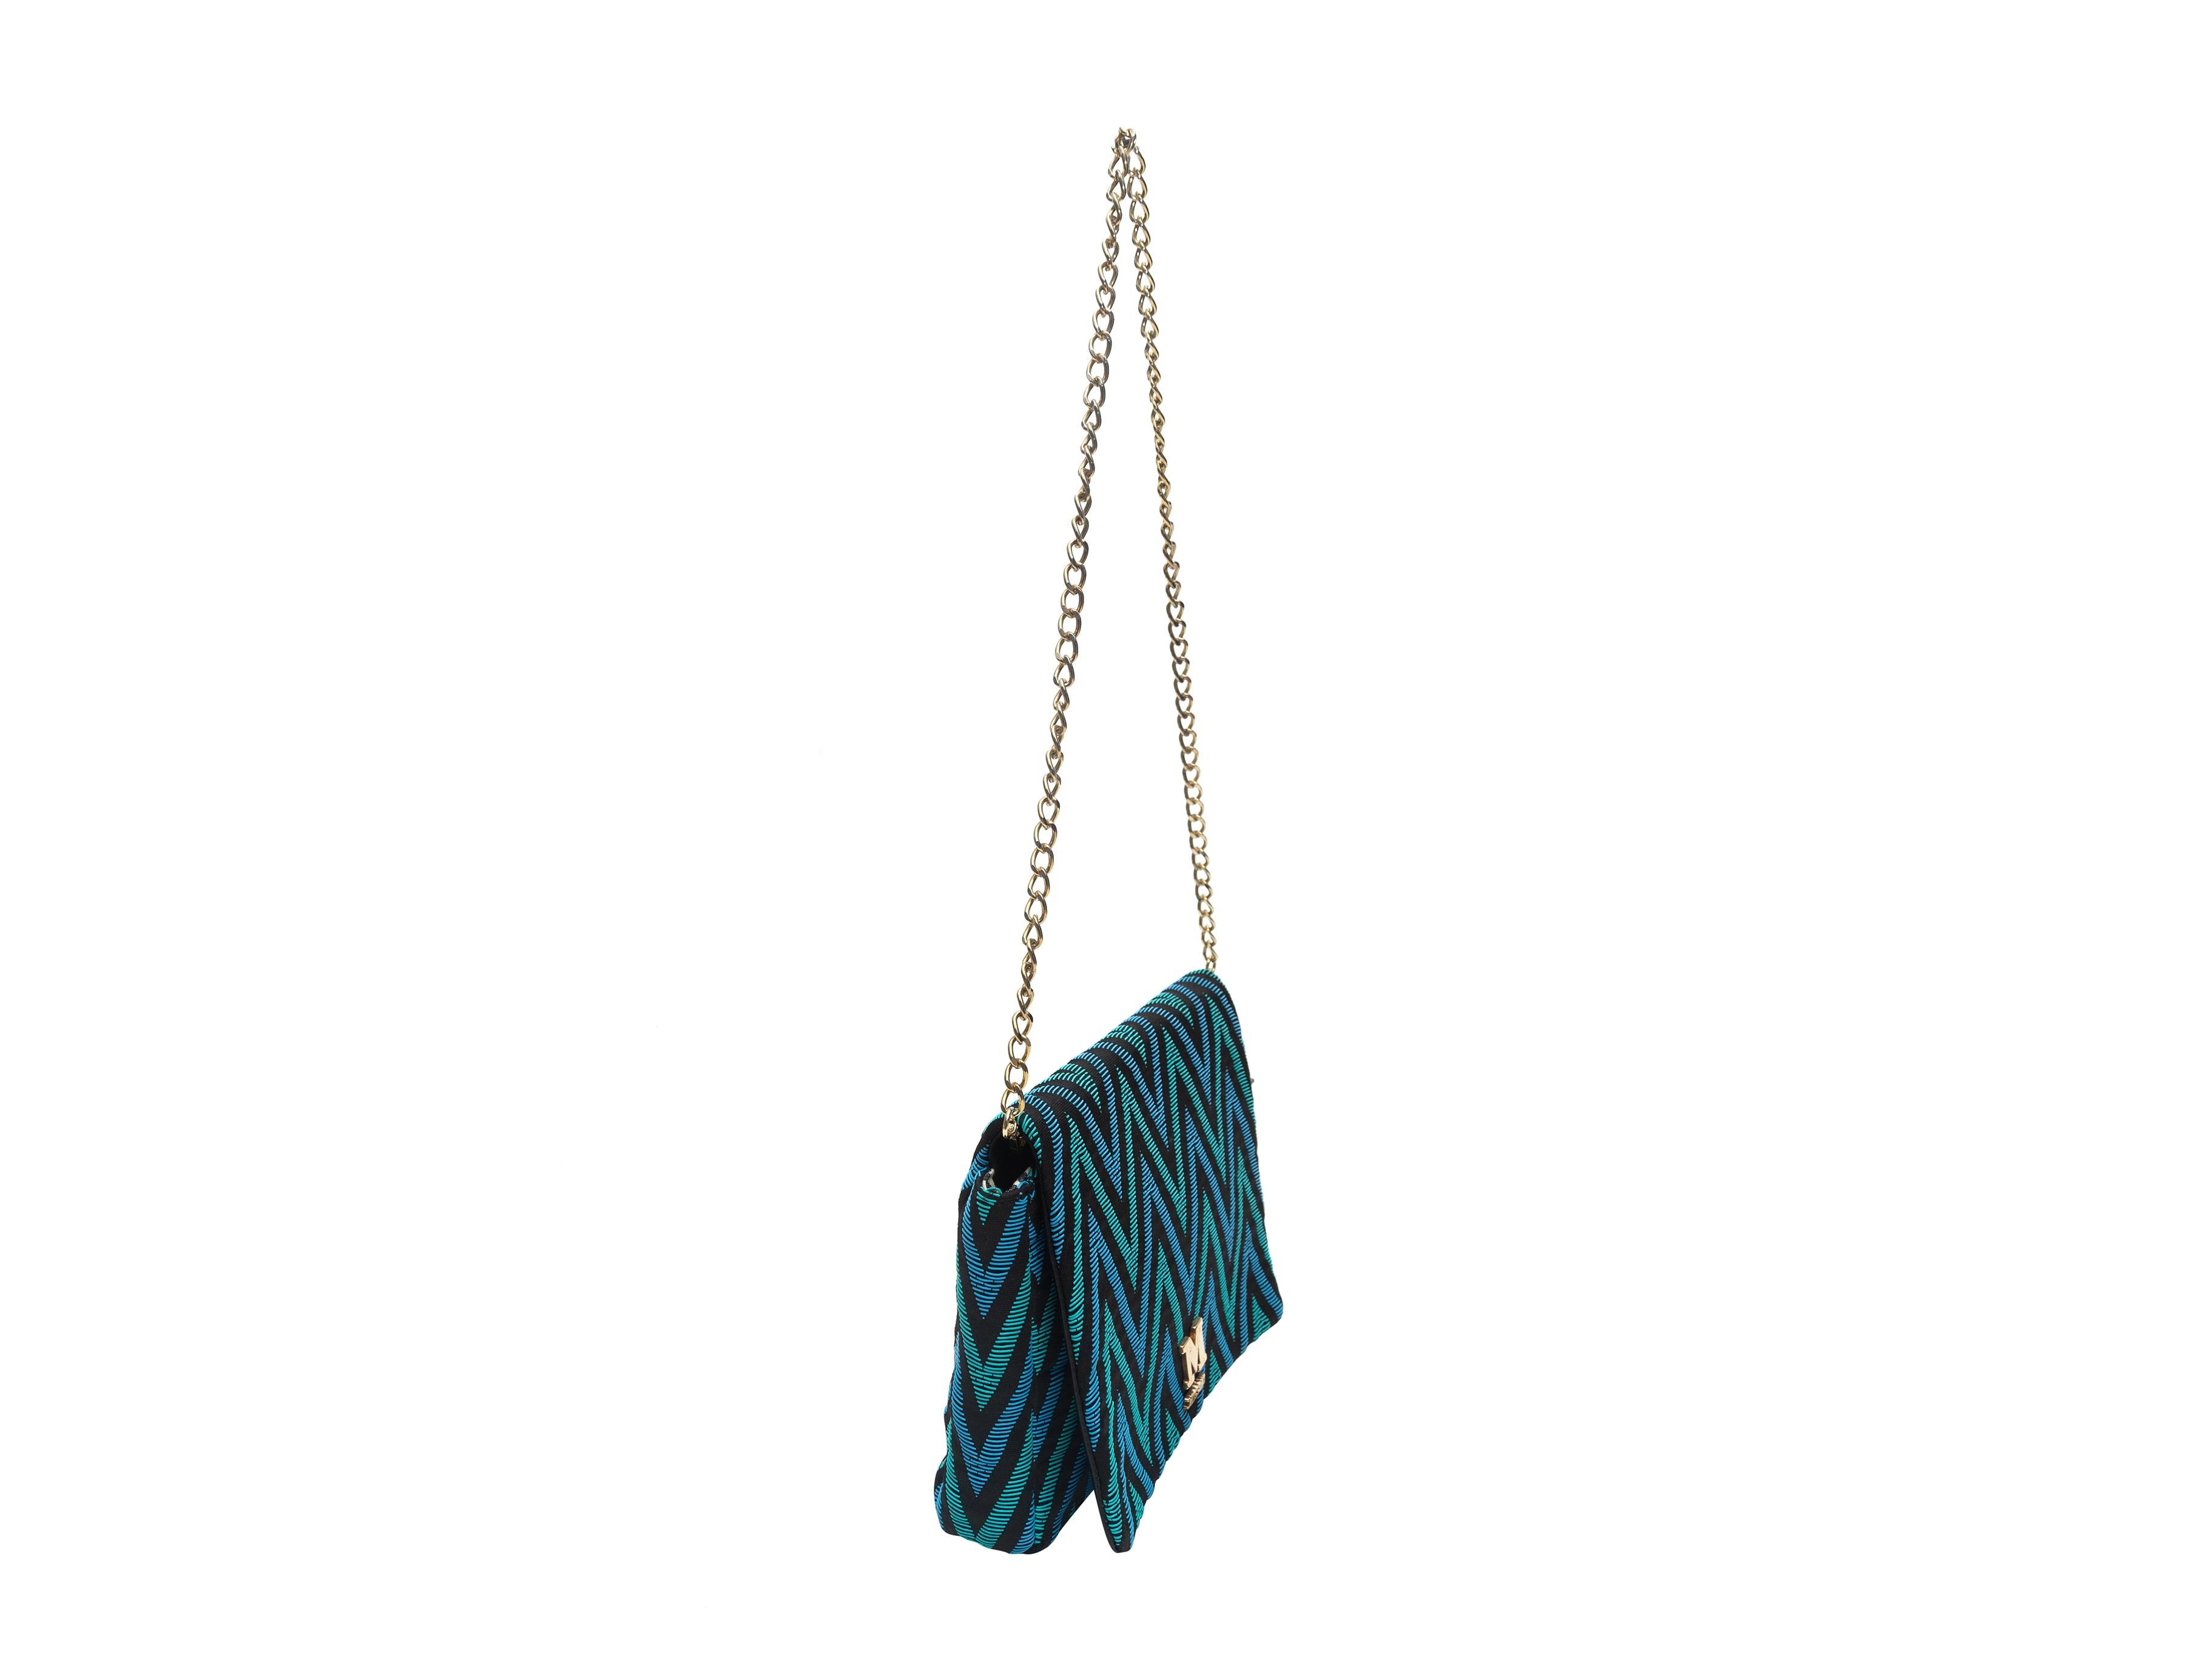 Product details: Teal, blue and black shoulder bag by M Missoni. Chevron pattern throughout. Gold-tone hardware. Chain-link strap. 10